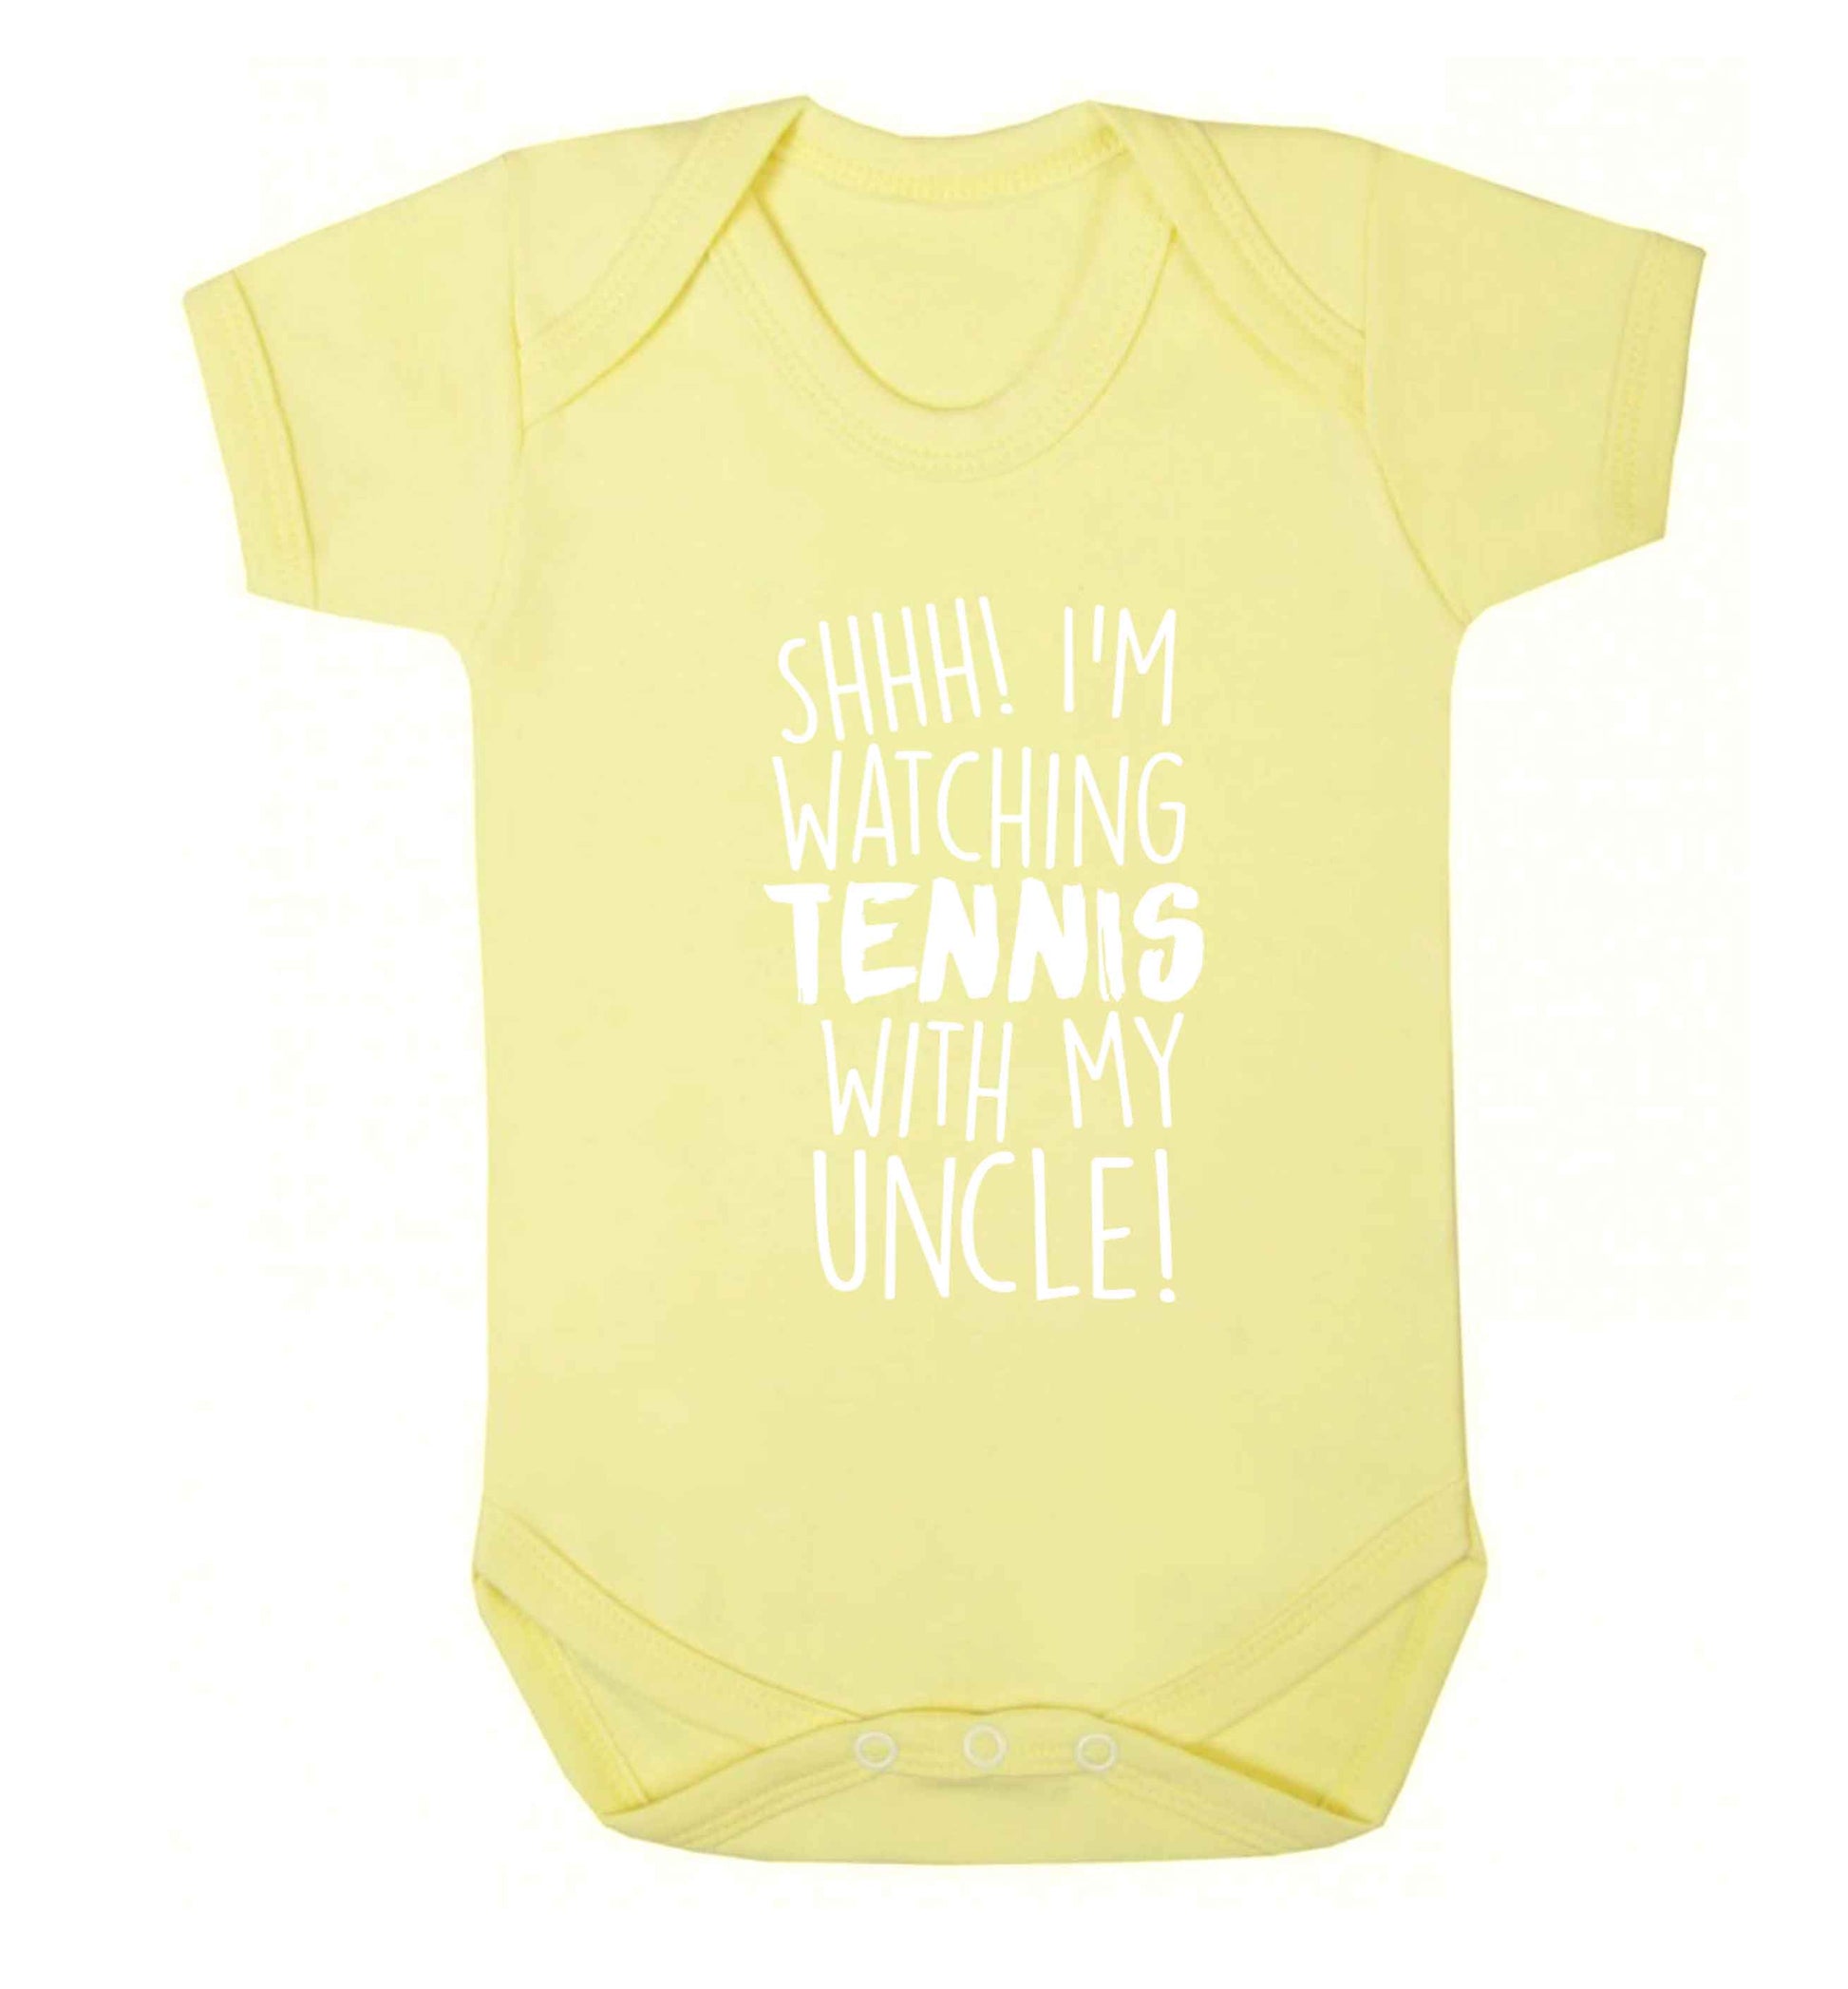 Shh! I'm watching tennis with my uncle! Baby Vest pale yellow 18-24 months